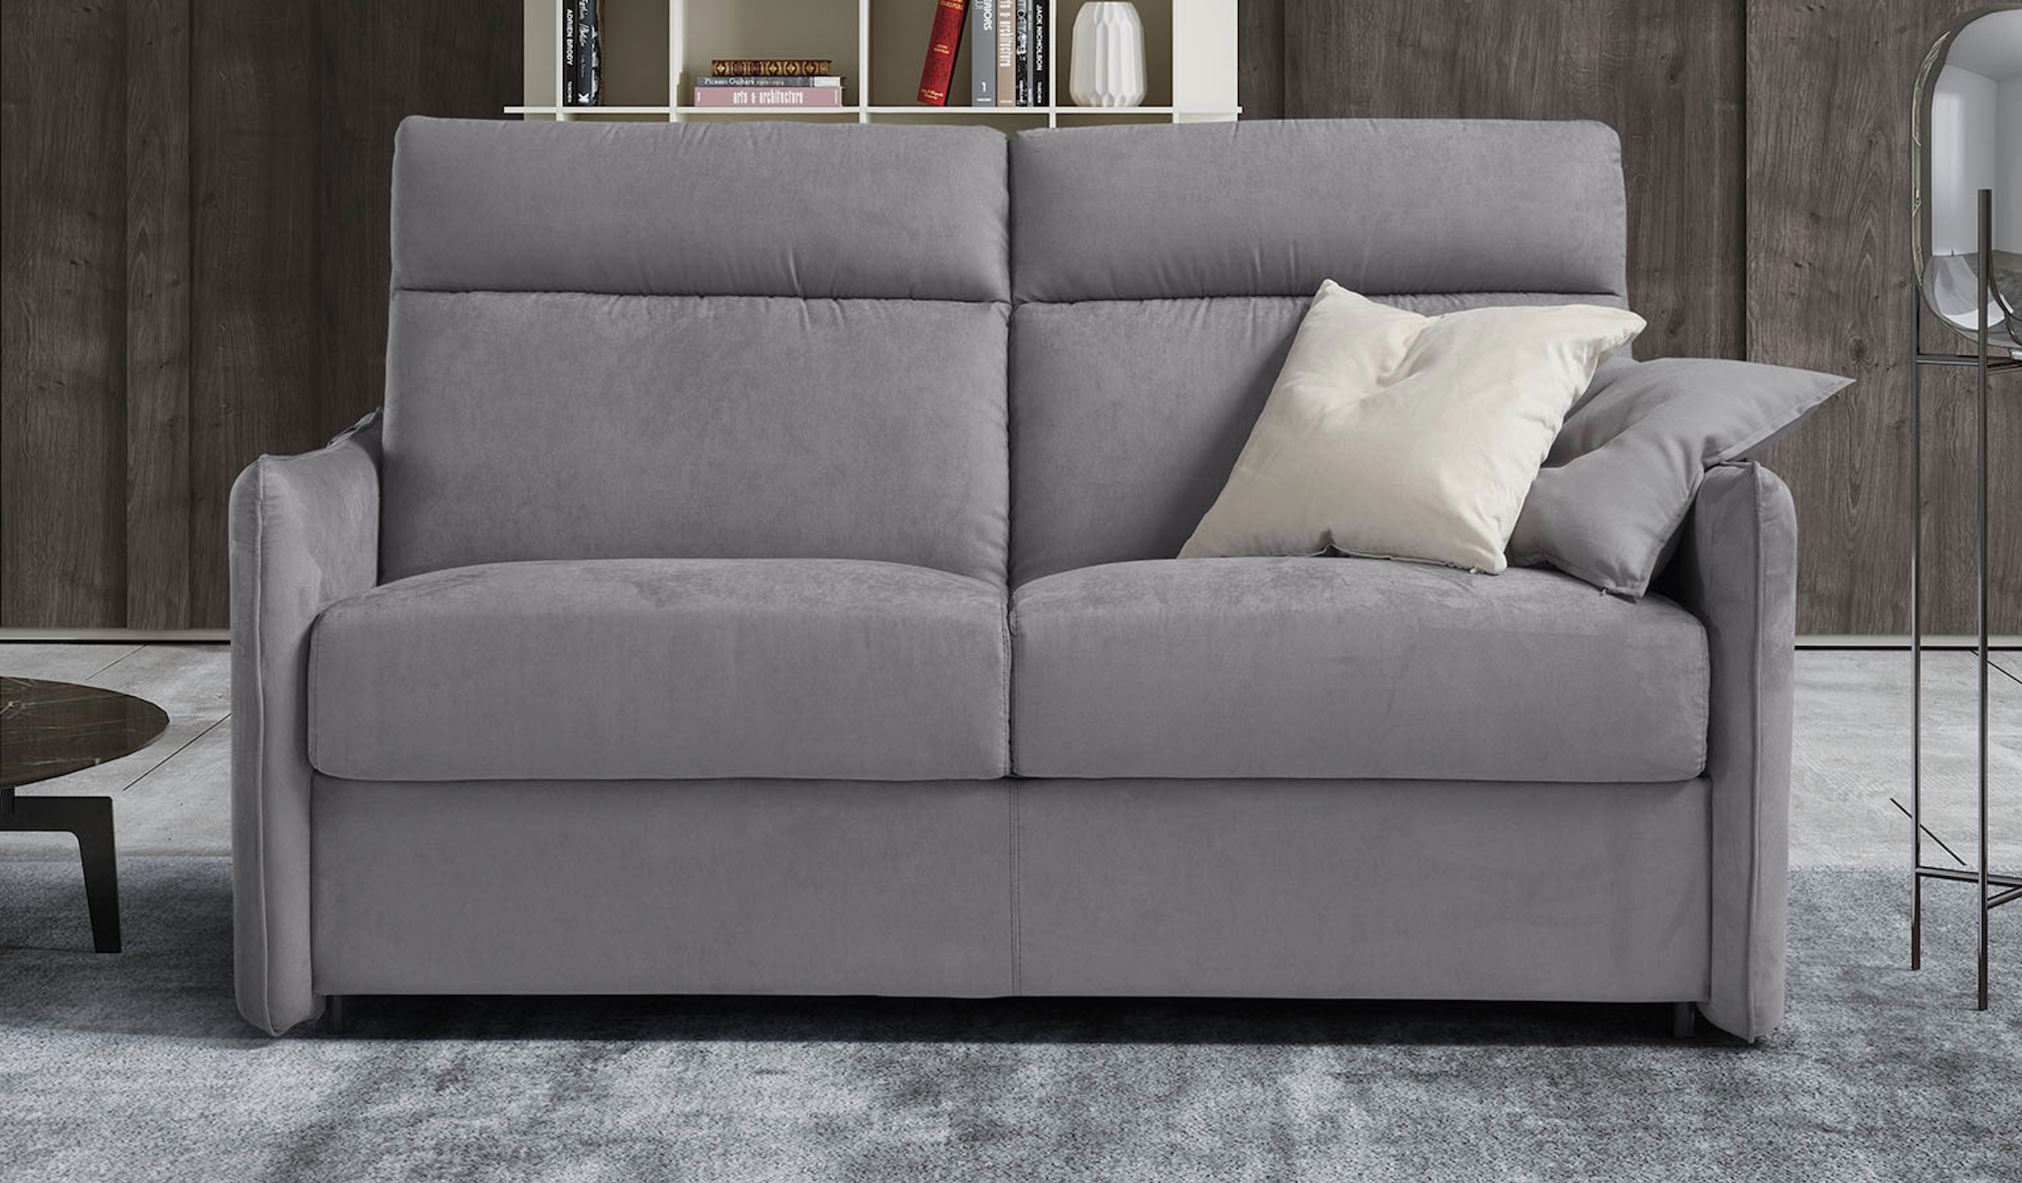 AIMEE Italian Crafted 3 Seat Sofa Bed in PLAZA GREY. RRP £1979 - Image 2 of 5